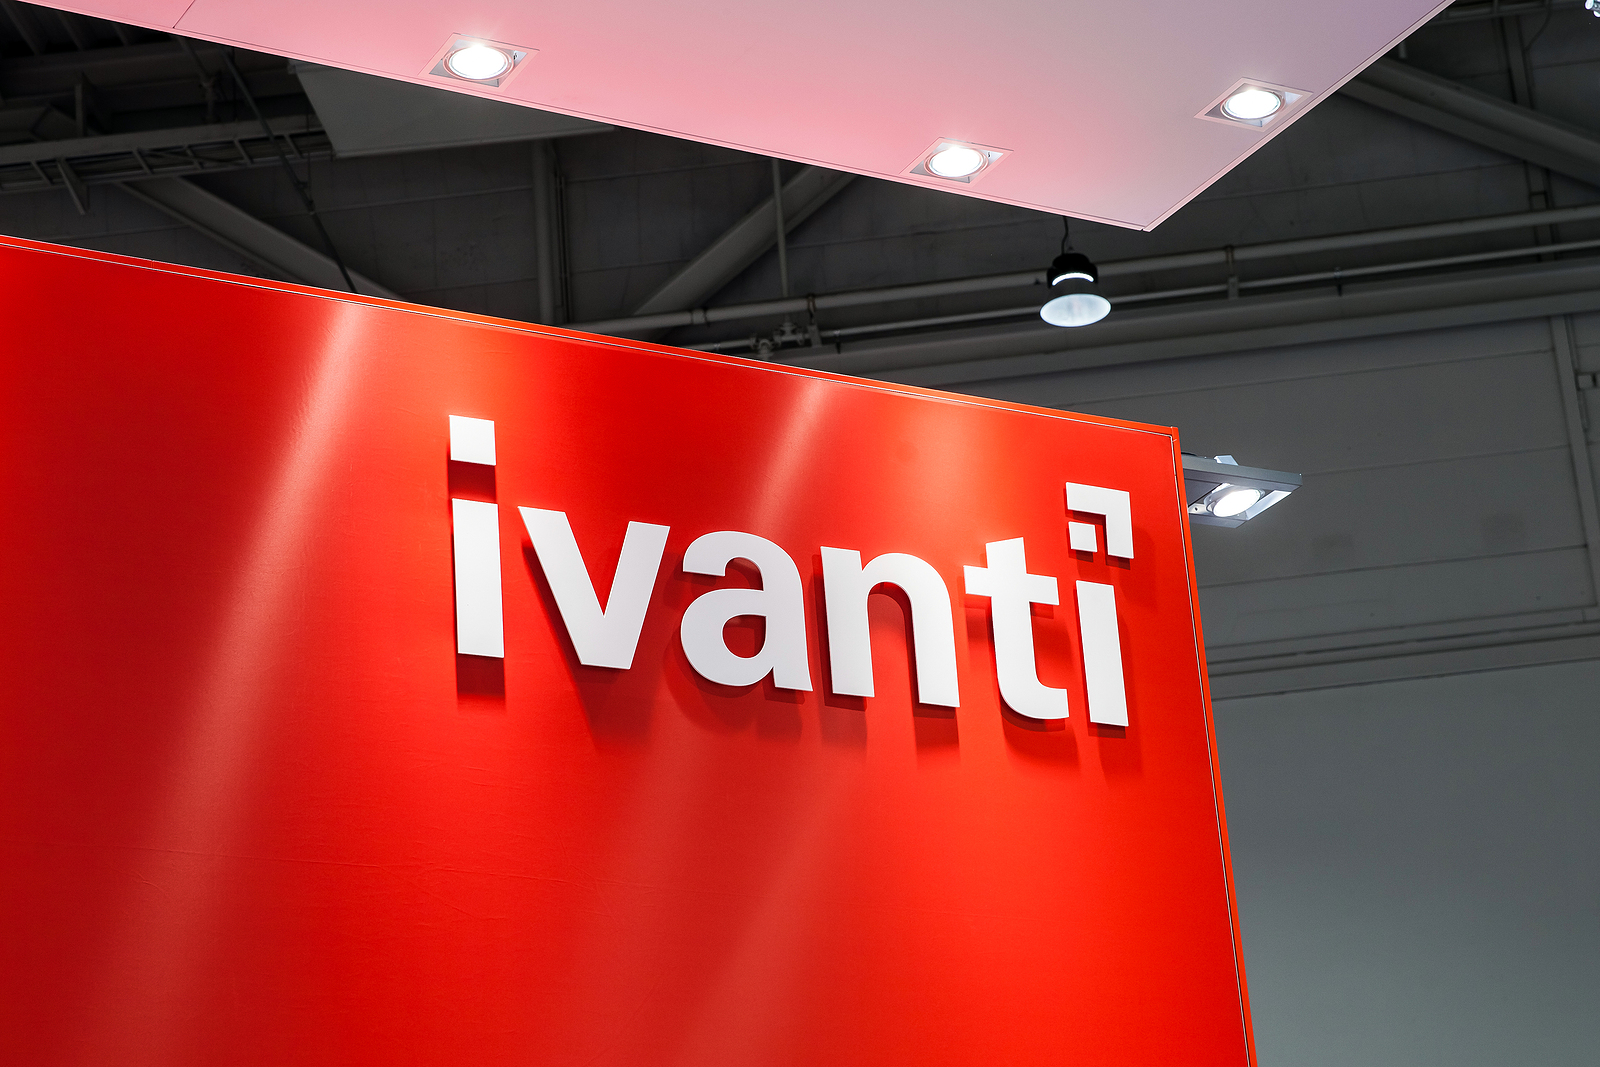 Ivanti Zero-Day Exploited by APT Since at Least April in Norwegian Government Attack – Source: www.securityweek.com